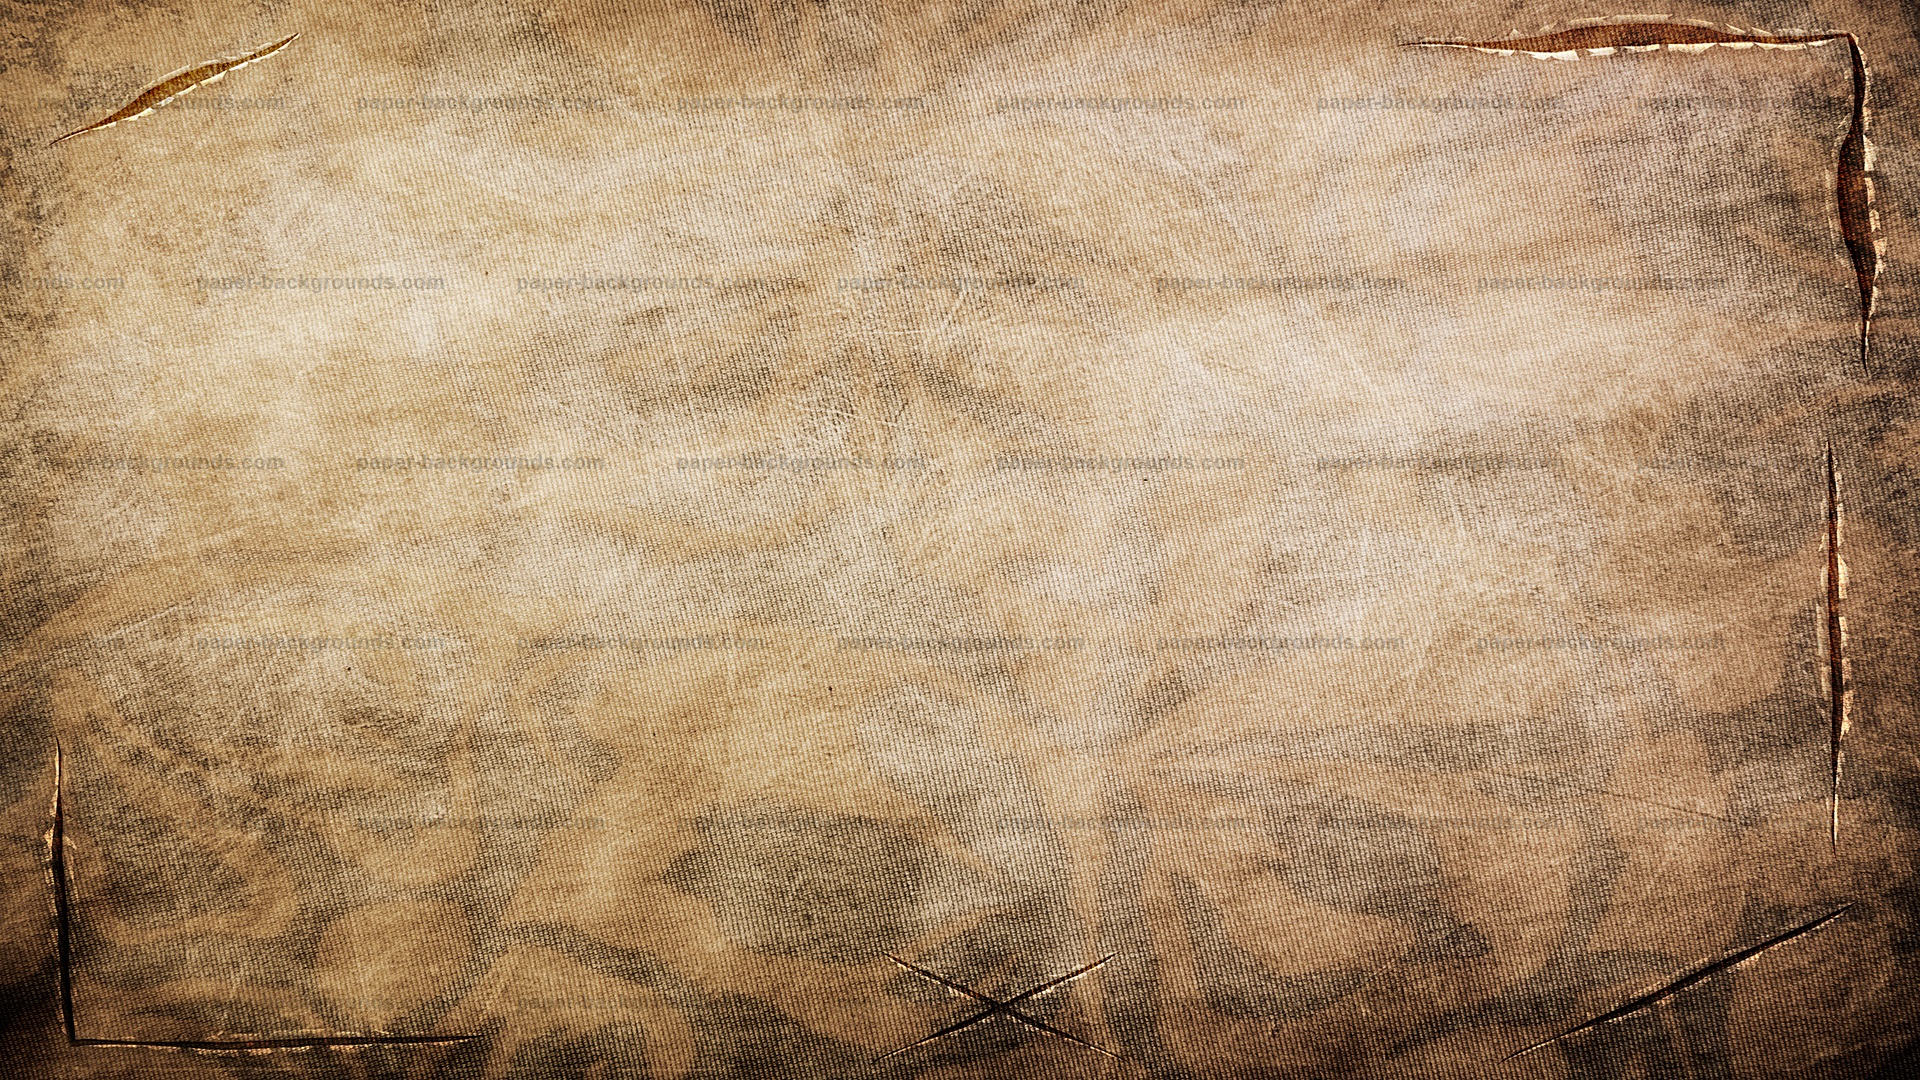 Vintage Brown Fabric Texture With Tears / Cuts Hd - Brown Rustic Paper Background , HD Wallpaper & Backgrounds